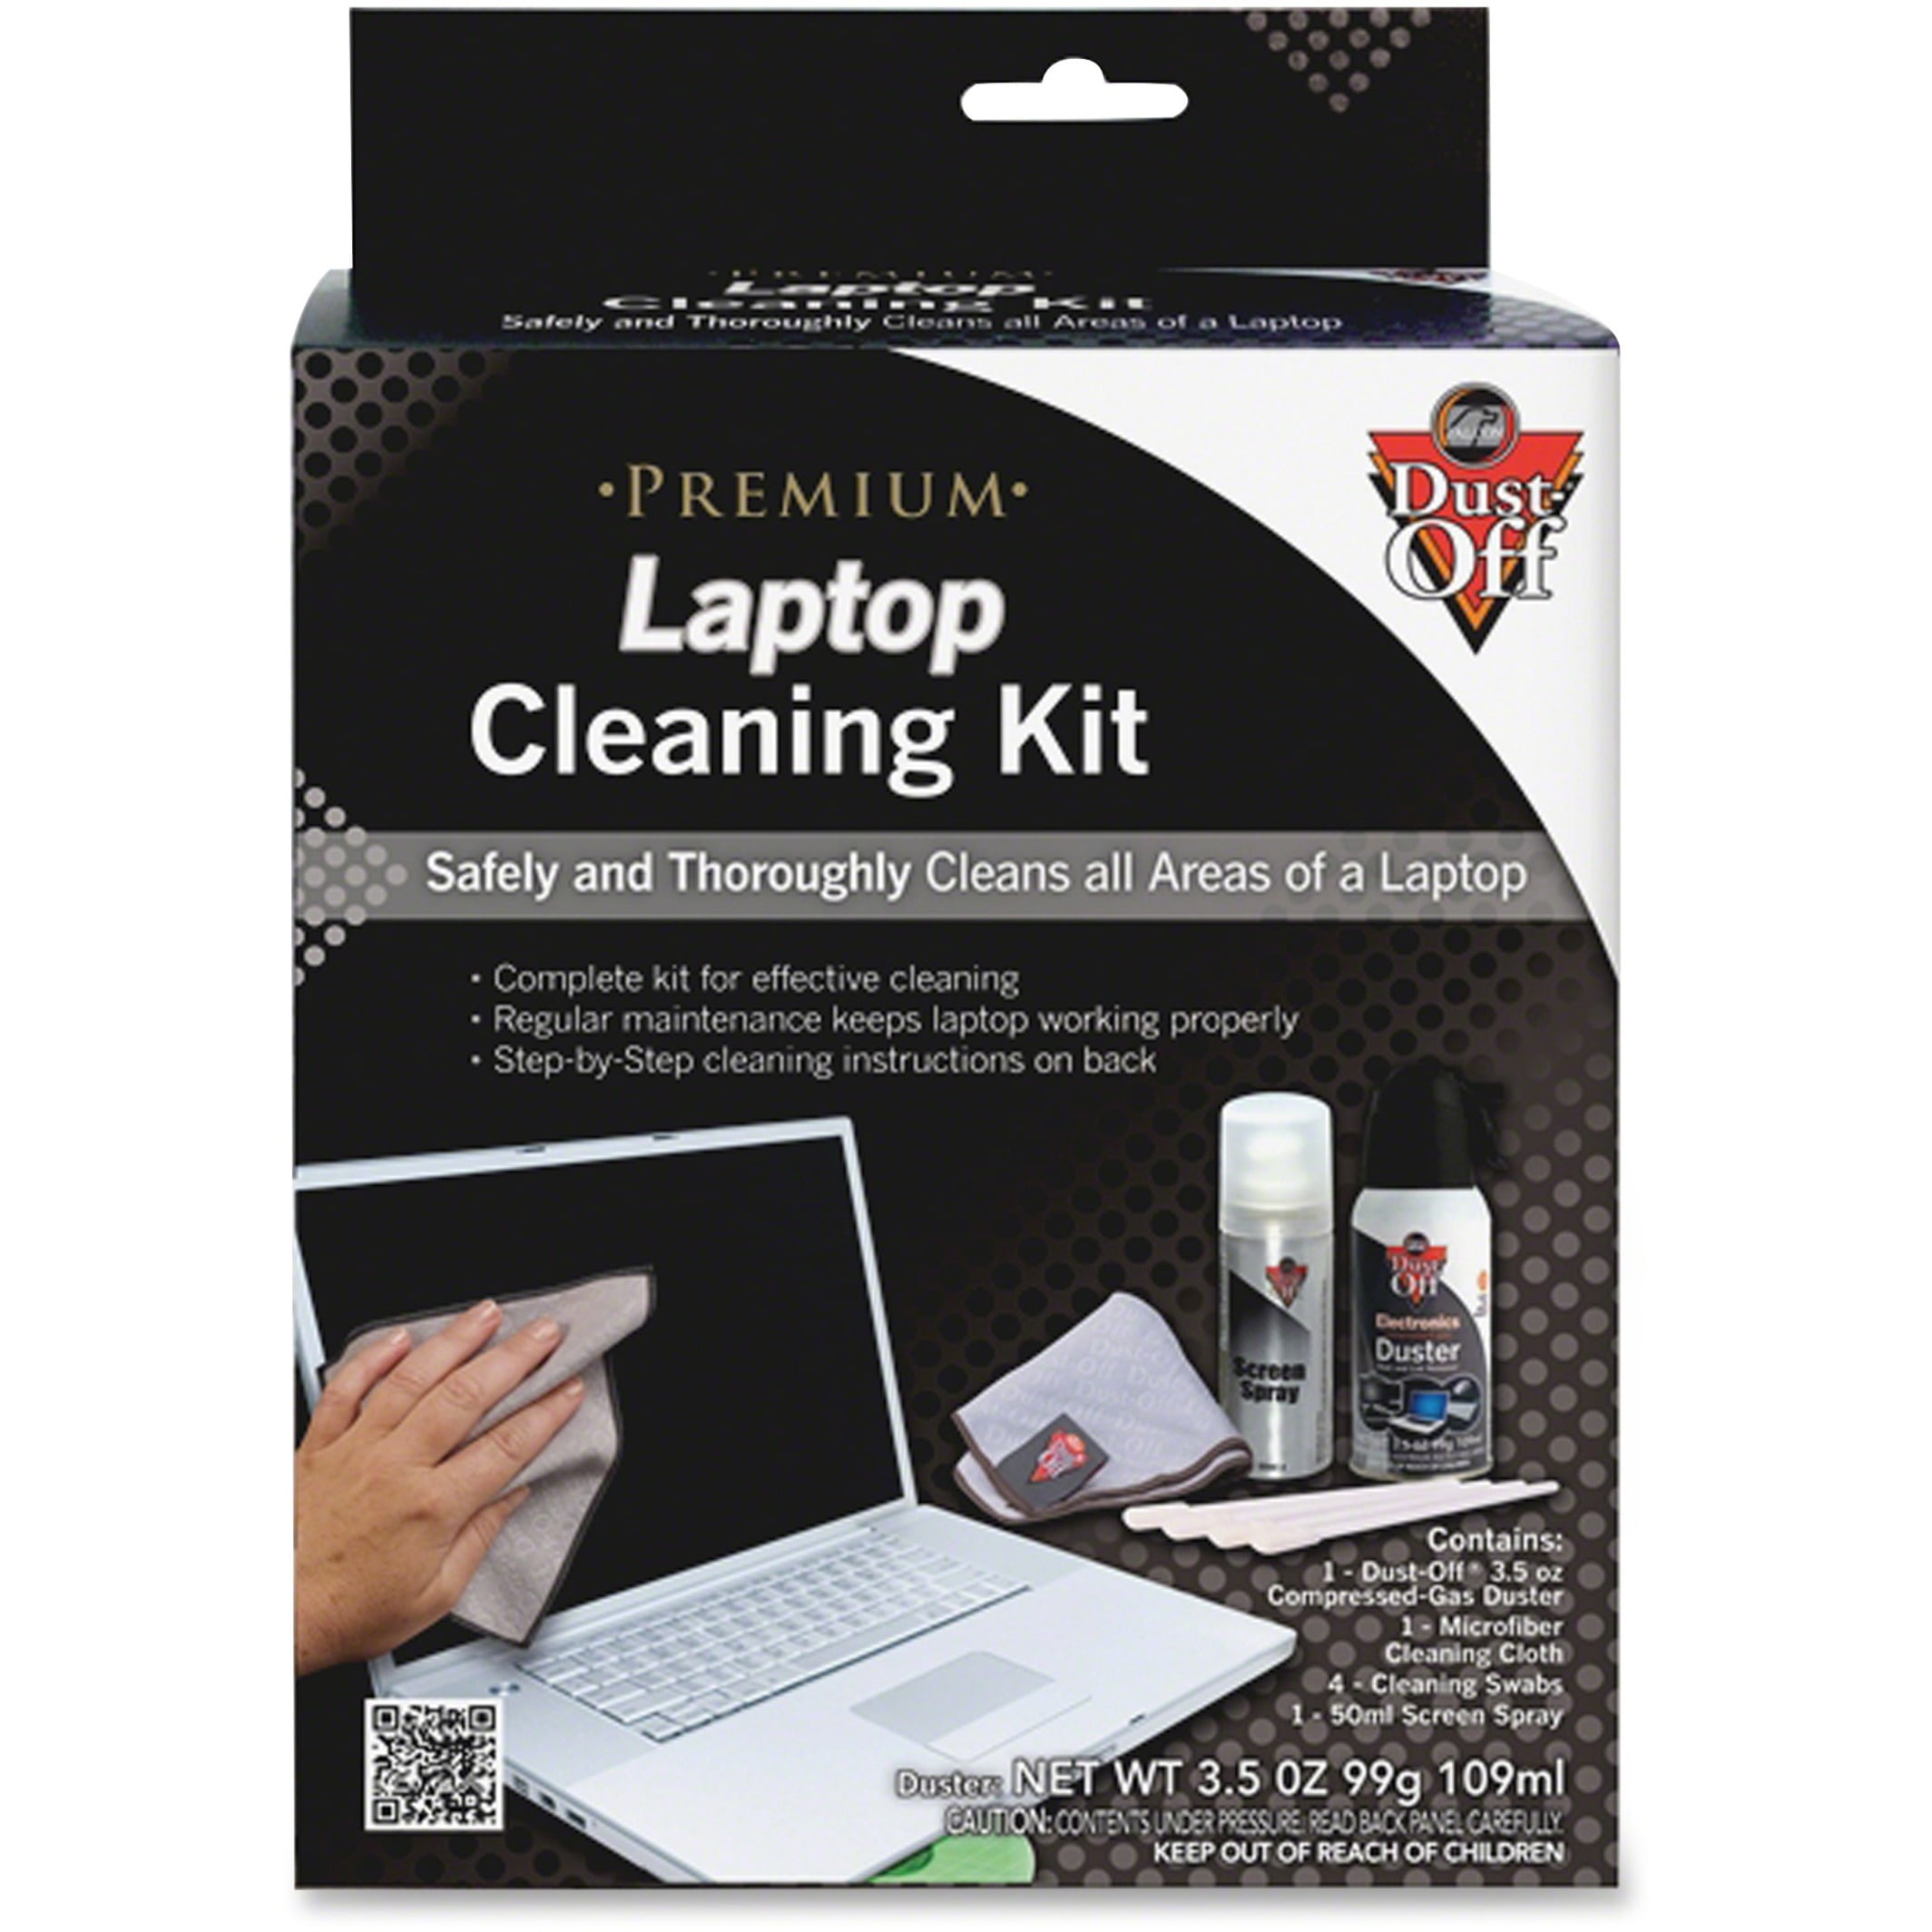 Camkix Keyboard Cleaning Kit 1x Mini Brush, 1x Cleaning Brush, 1x Keyboard Cap Remover, 1x Air Blower & 1x Cleaning Cloth Also for Laptops